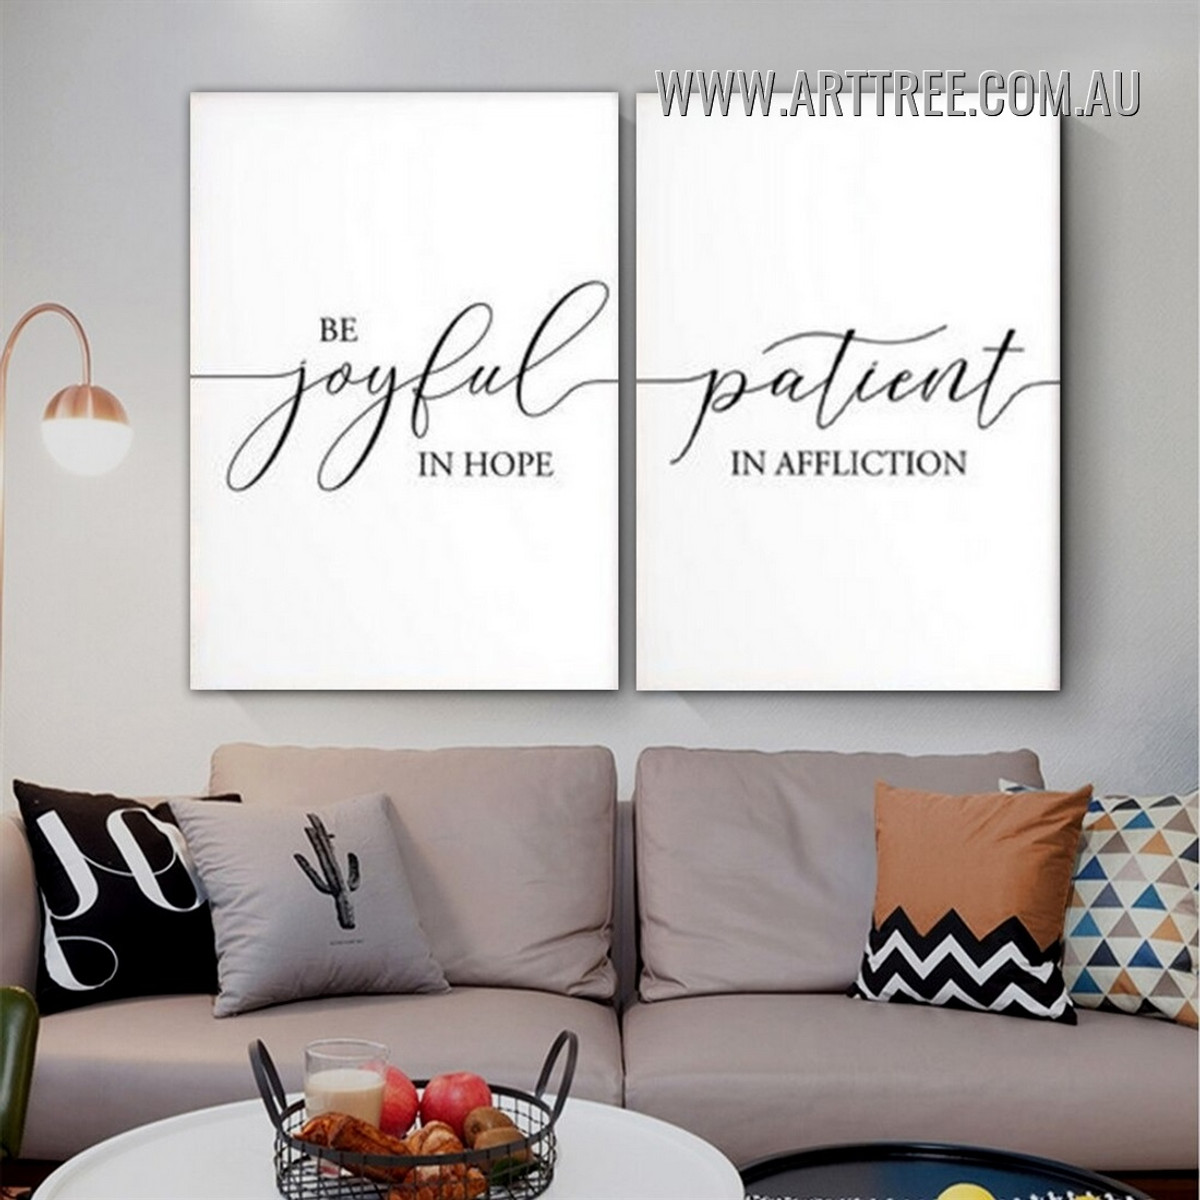 Be Joyful In Hop Patient In Affliction Typography Modern Painting Picture Canvas 2 Piece Wall Art Prints for Room Décor